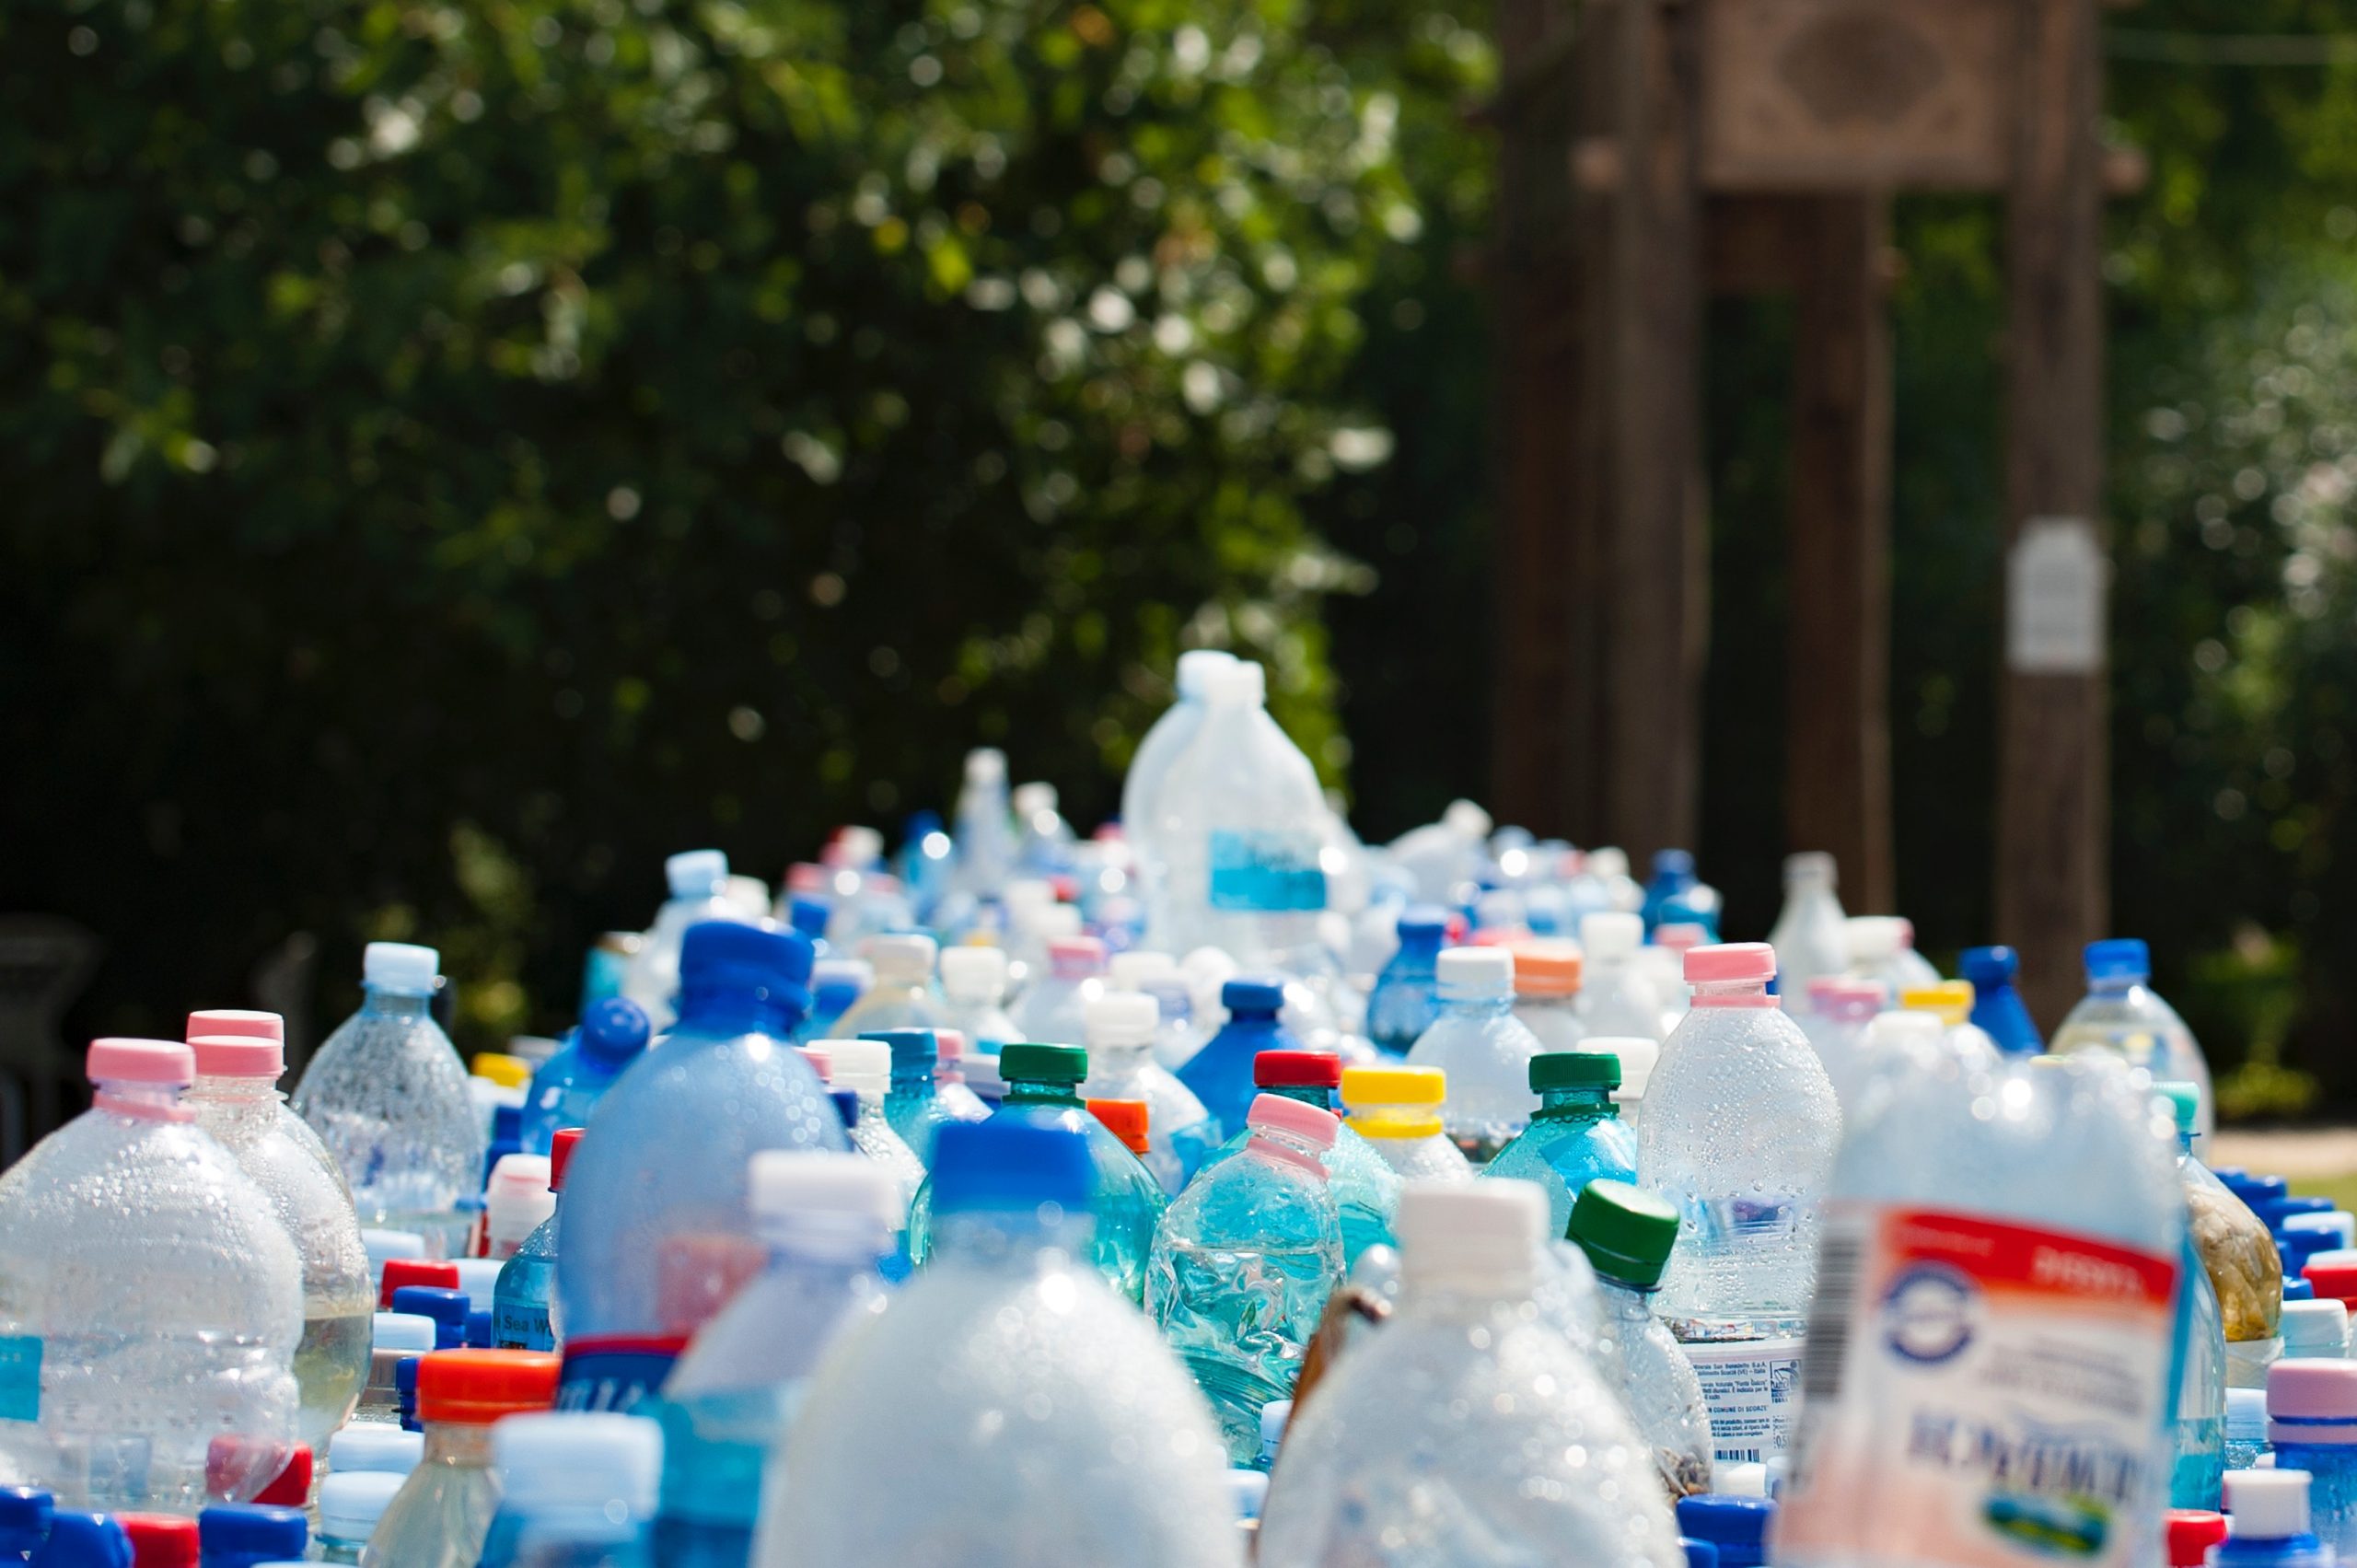 Polish Scientists Predict Plastic Waste Could Fuel Our Vehicles By 2020